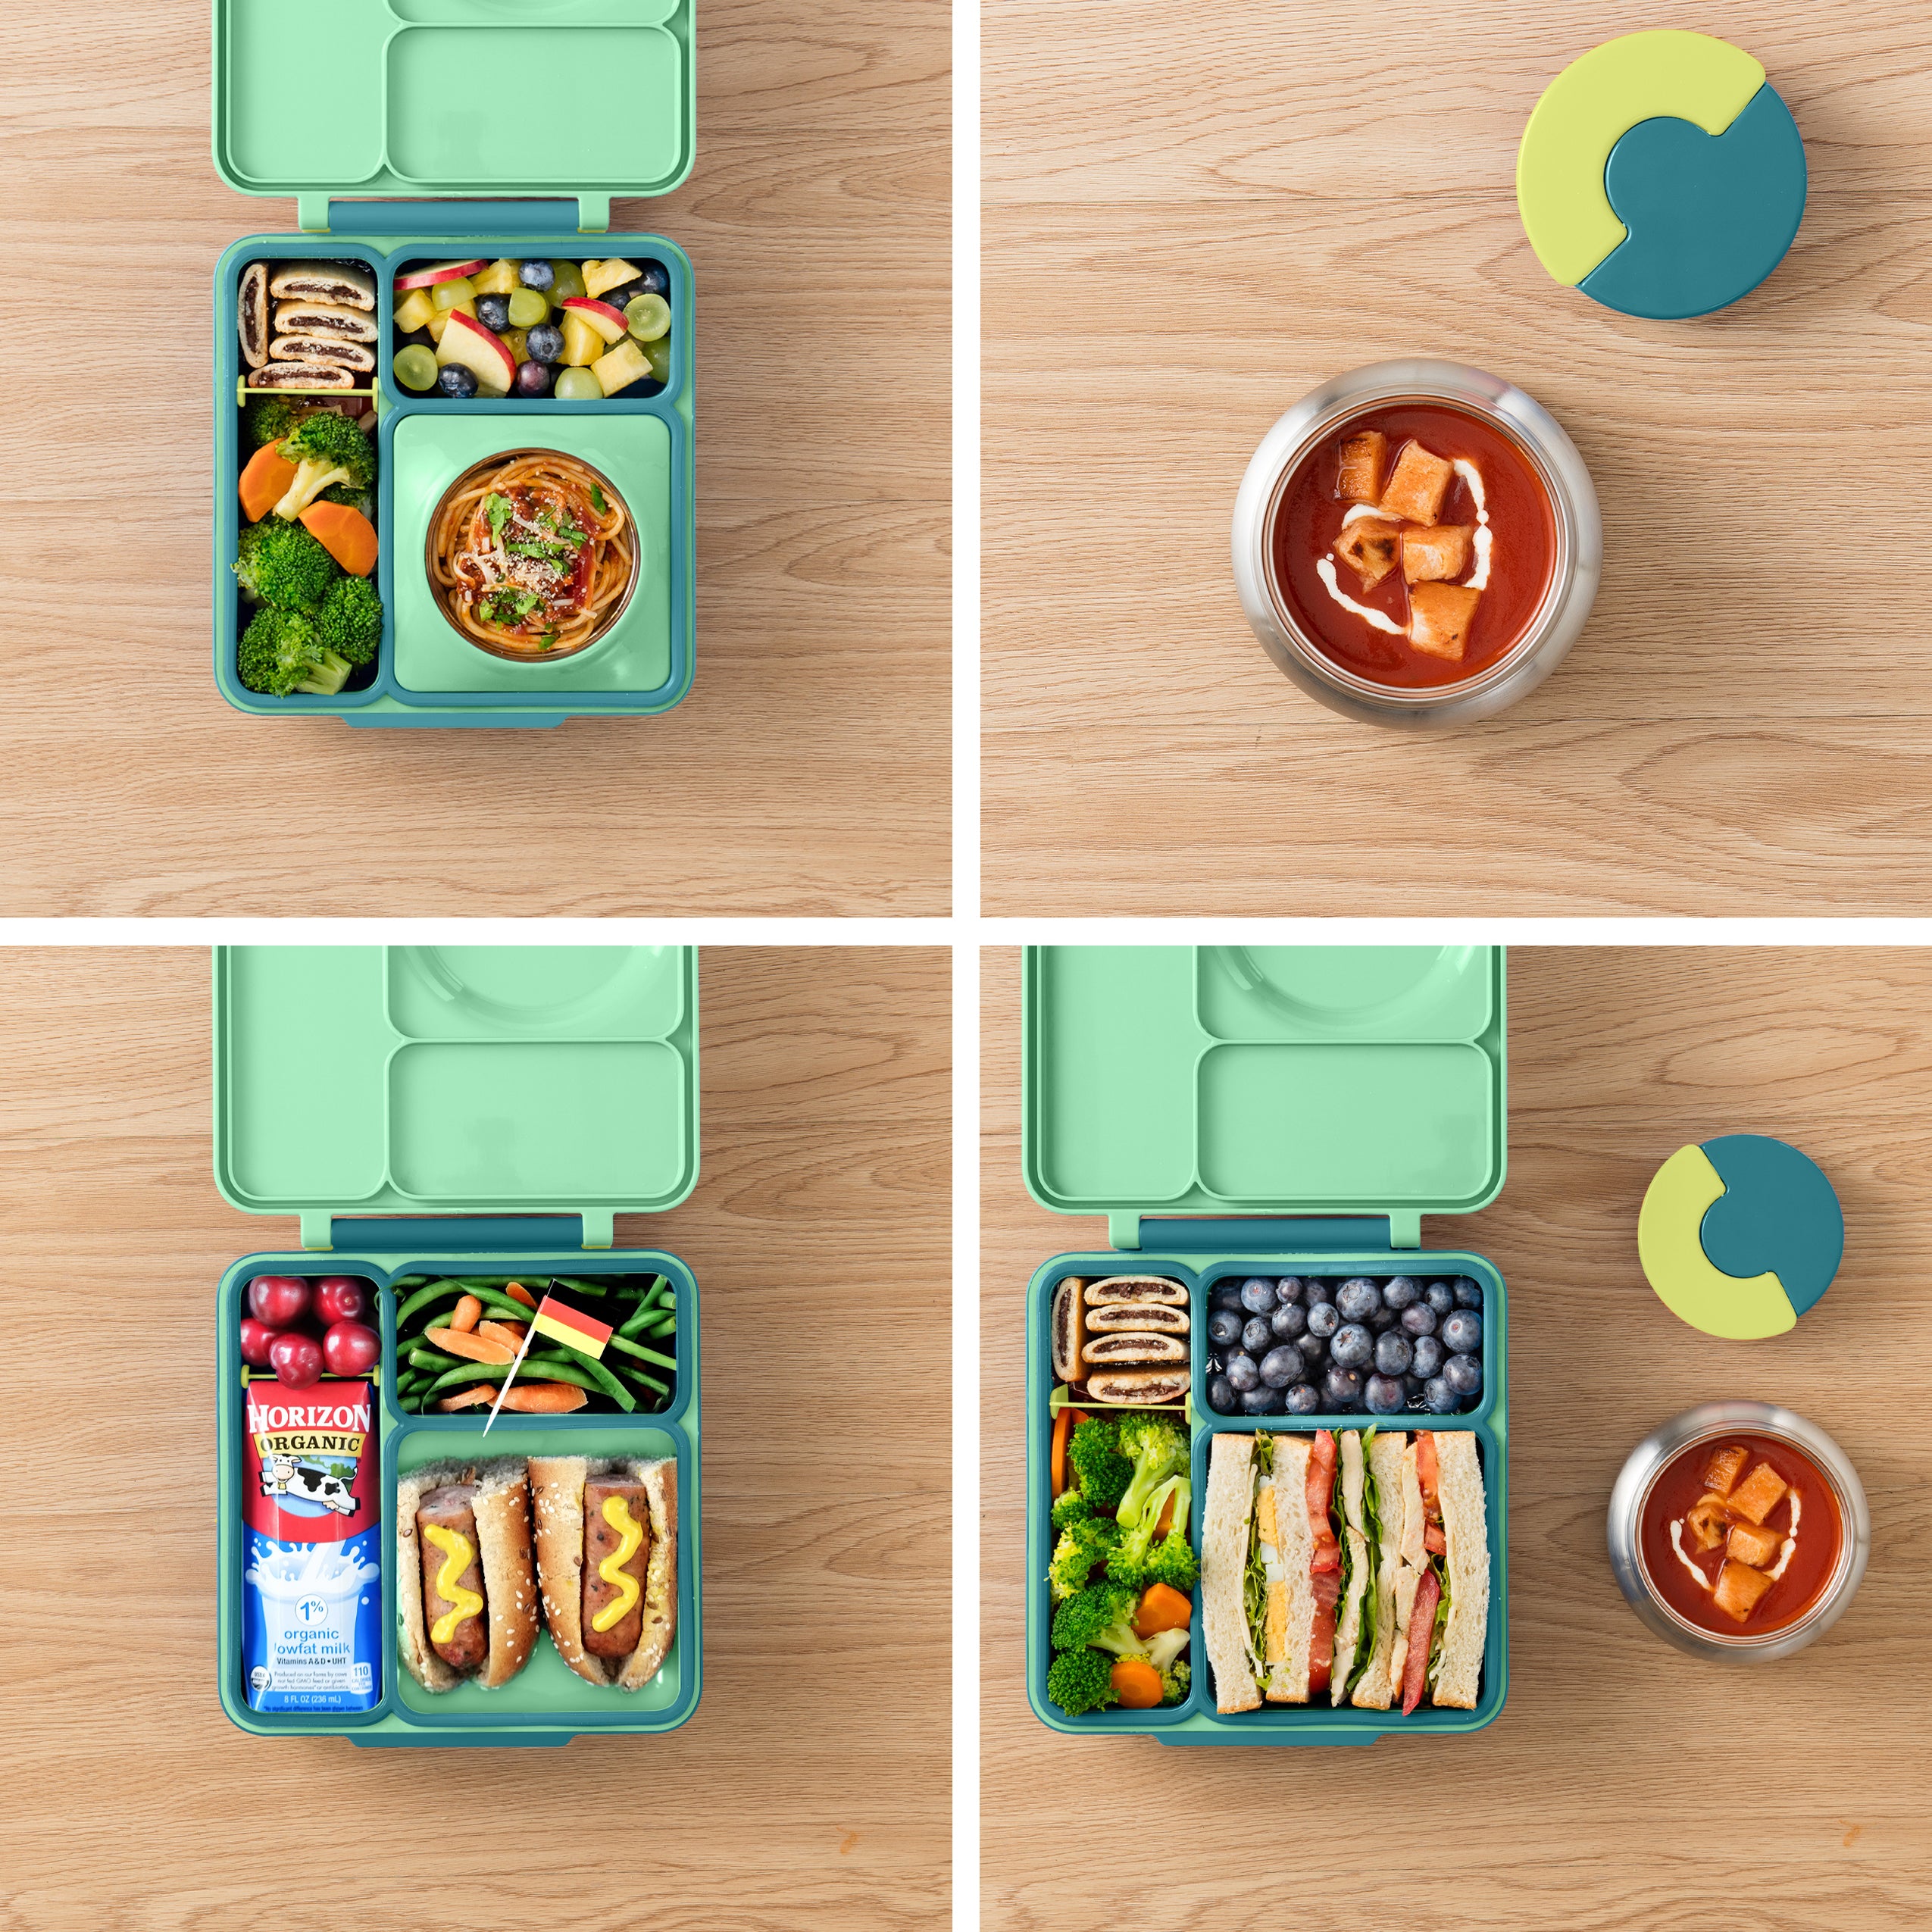 Keep Warm Lunch Box Bento Box Fresh Bowl Temperature Display Students Kids Adults Insulation Food Container Tableware Kitchen, Adult Unisex, Size: One